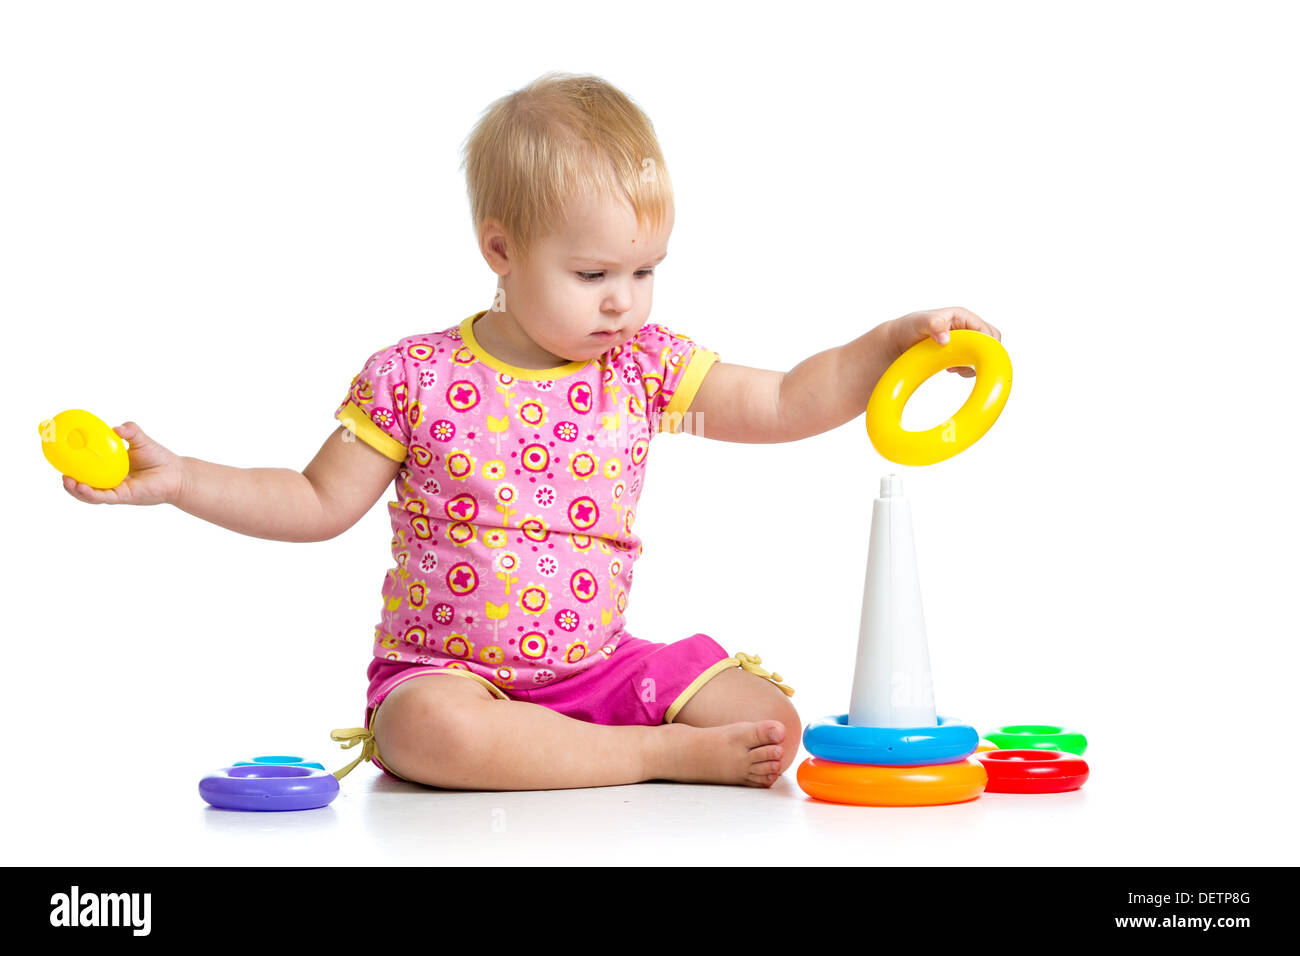 Kid girl playing toy pyramide Banque D'Images